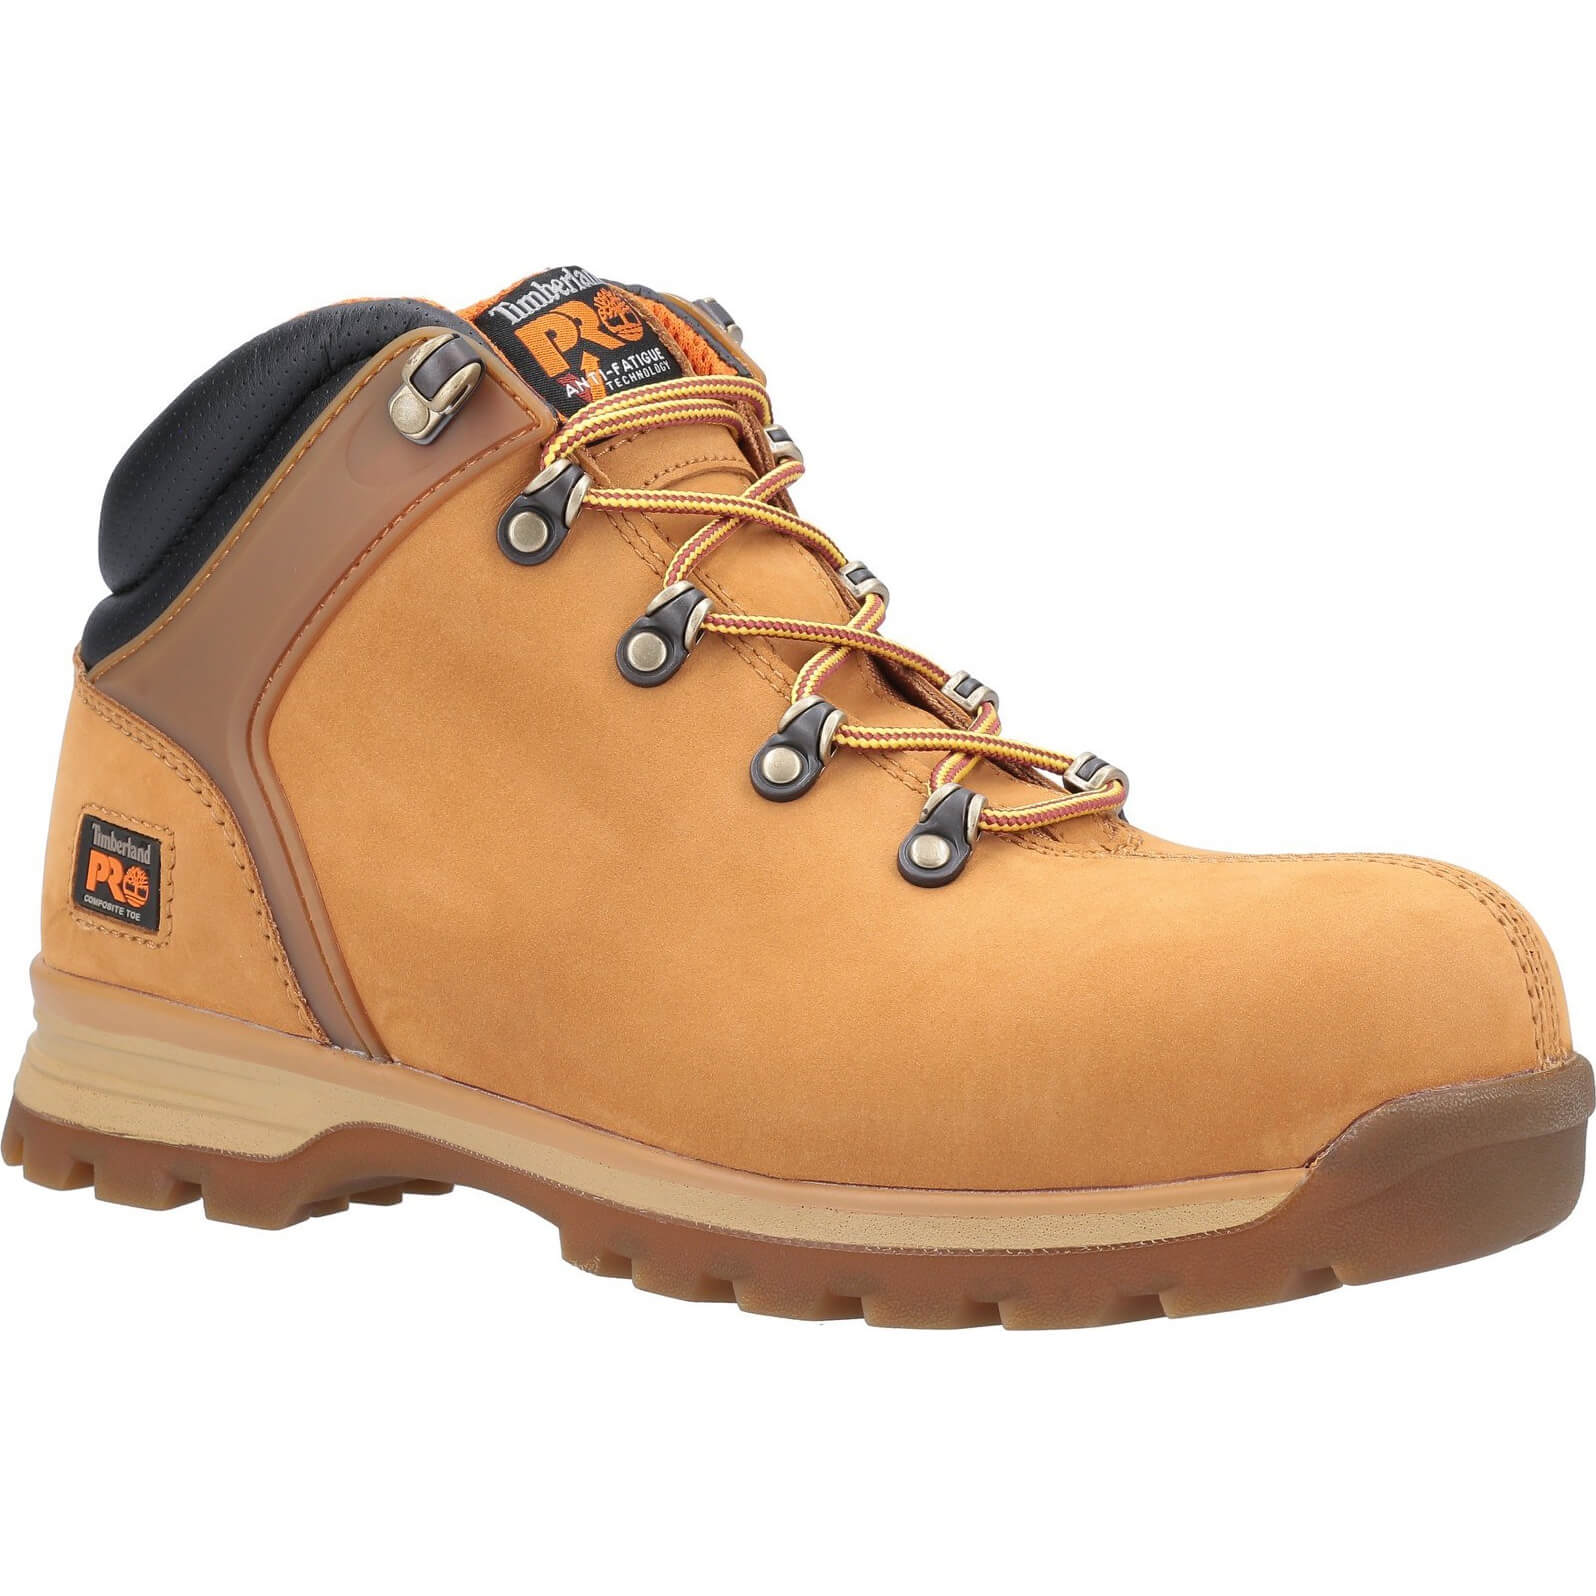 Image of Timberland Pro Splitrock XT Composite Safety Toe Work Boot Wheat Size 9